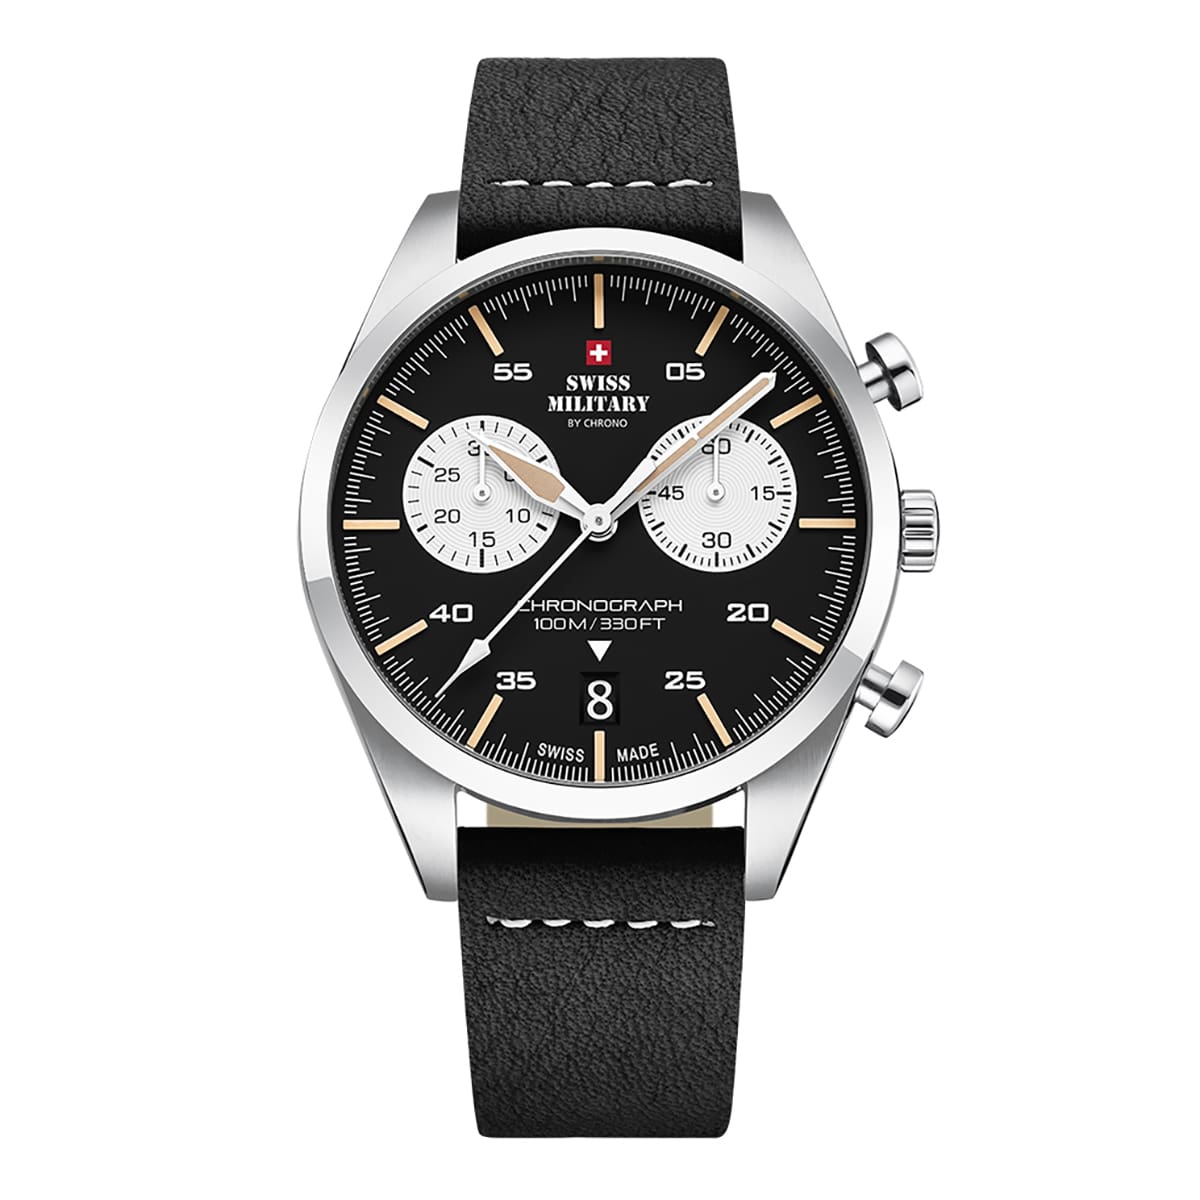 MONTRE SWISS MILITARY HOMME CHRONO CUIR